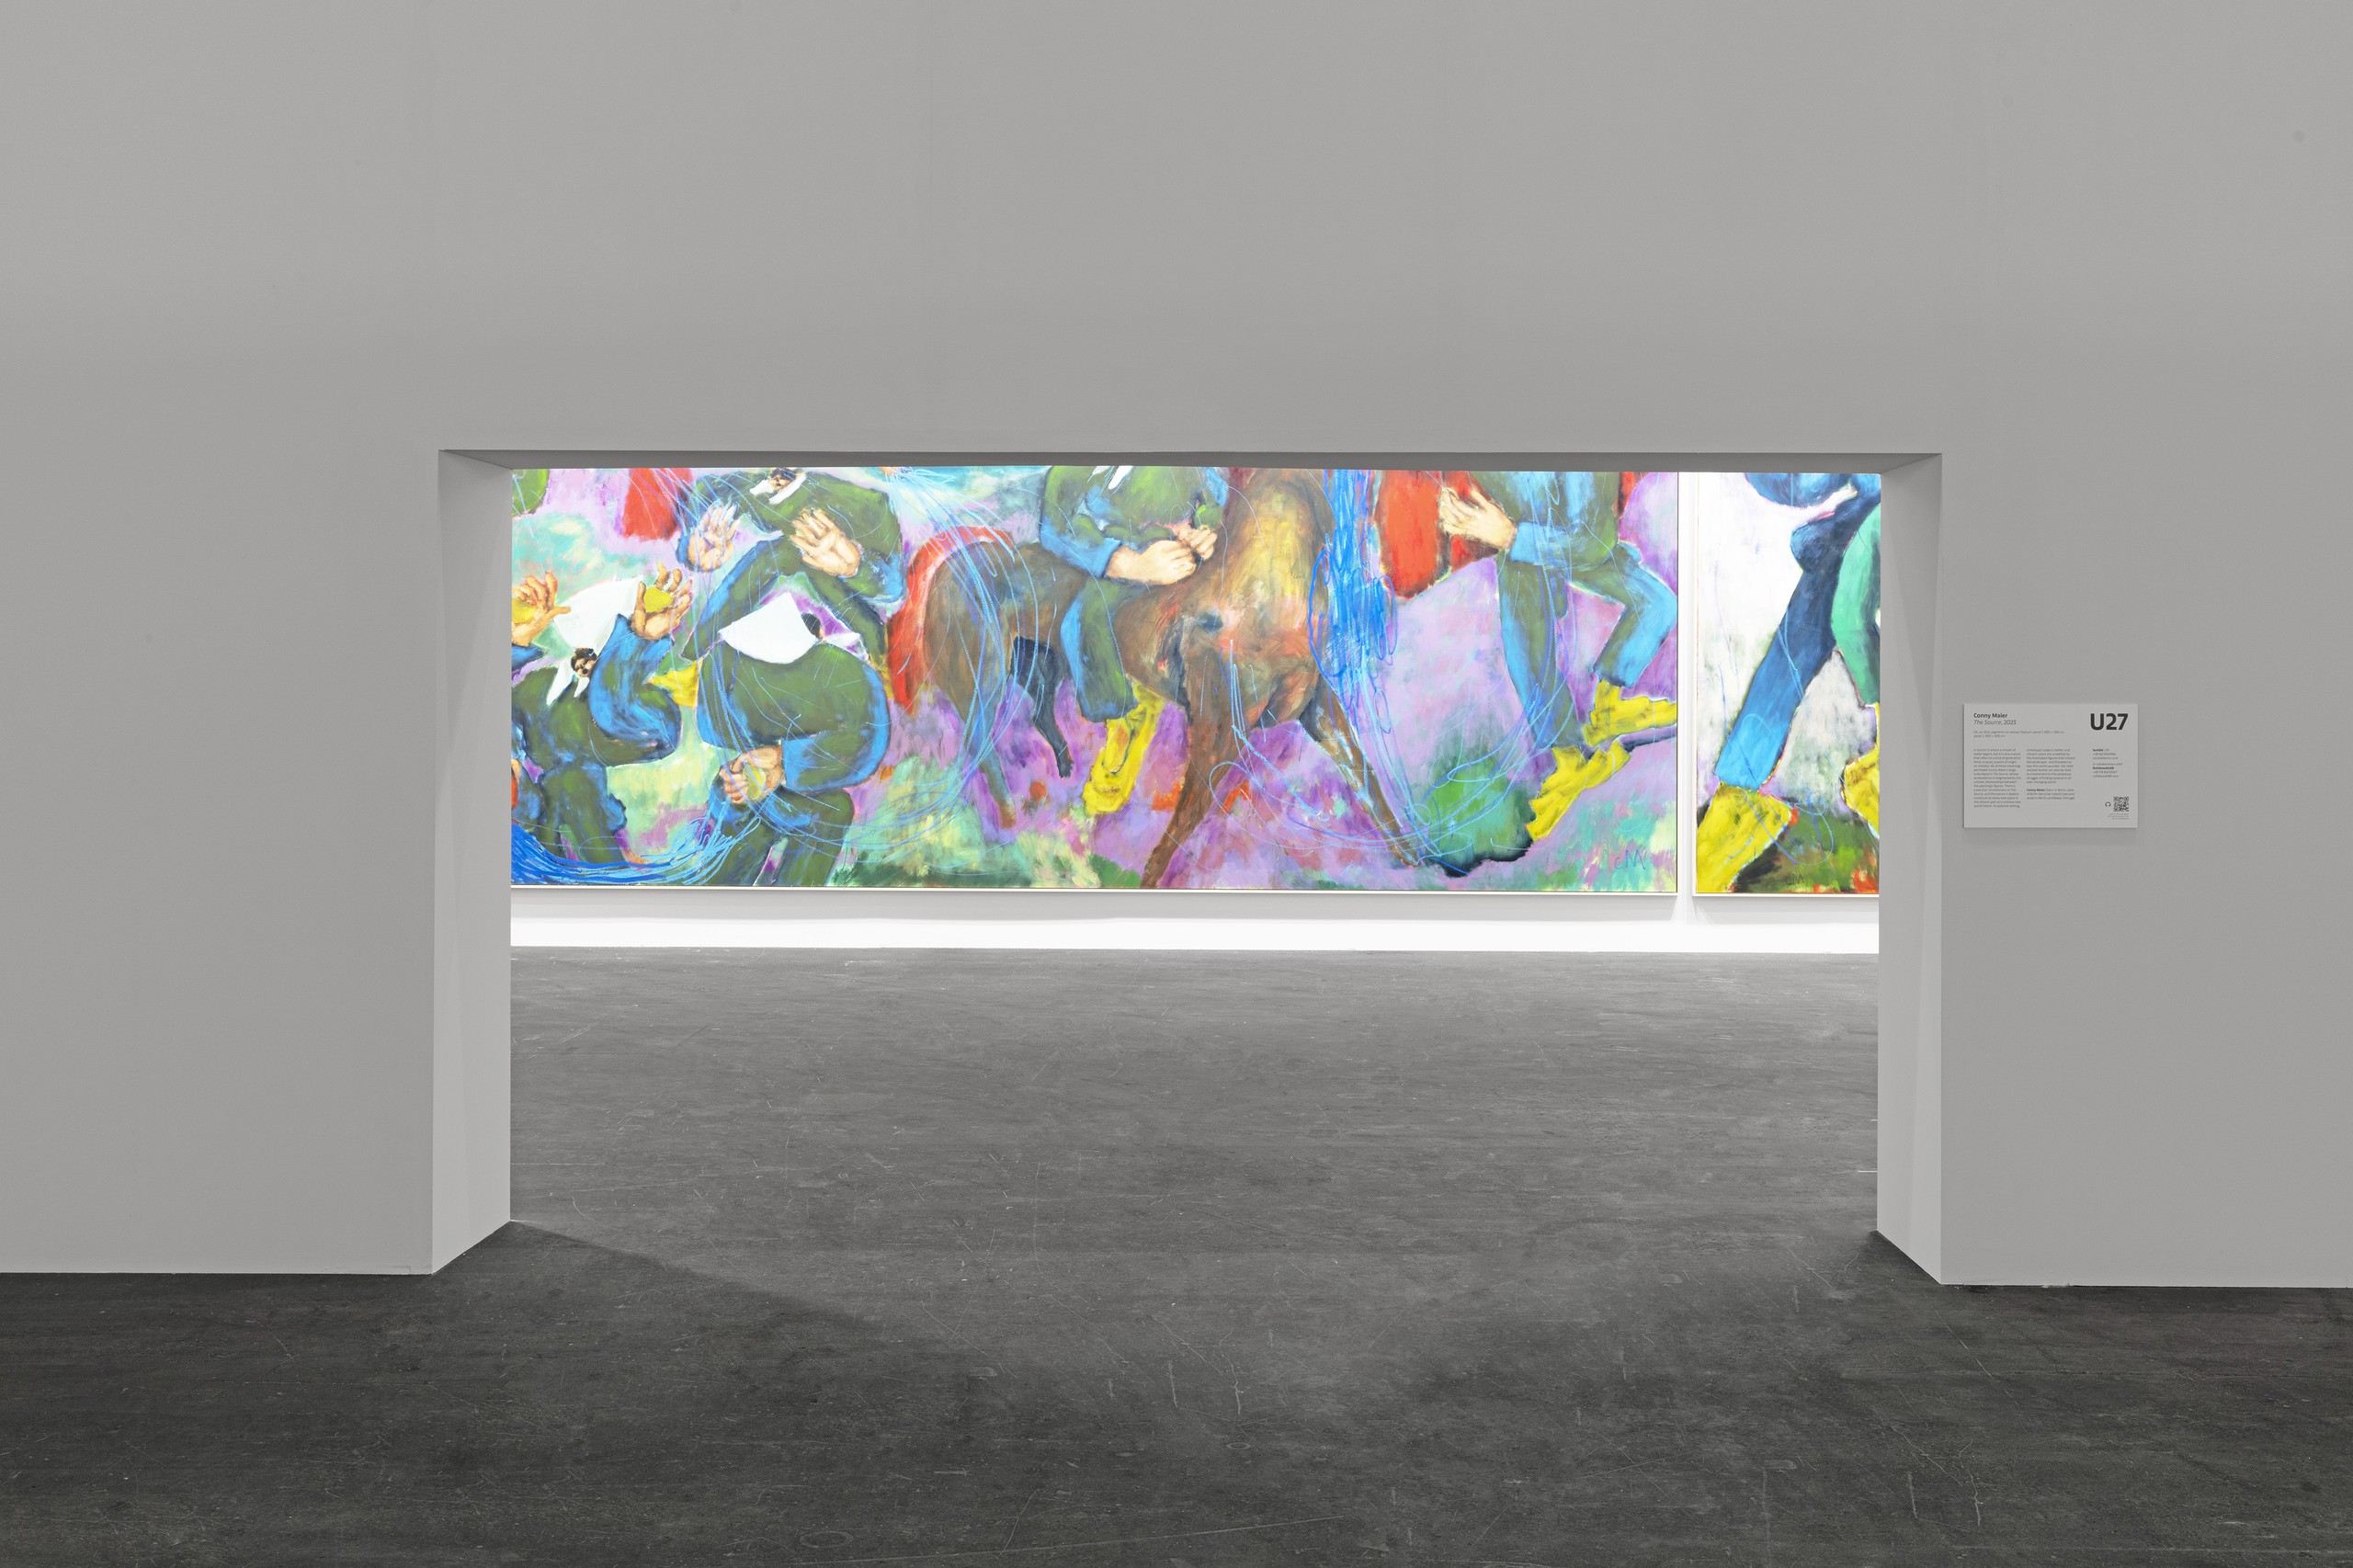 Installation view, Art Basel Unlimited 2023, curated by Giovanni CarmineConny MaierThe Source, 2023Oil, oil stick, pigments on canvasPanel 1: (300 x 700 cm // 118 x 275 1/2 in)Panel 2: (300 x 200 cm // 118 x 78 1/2 in)